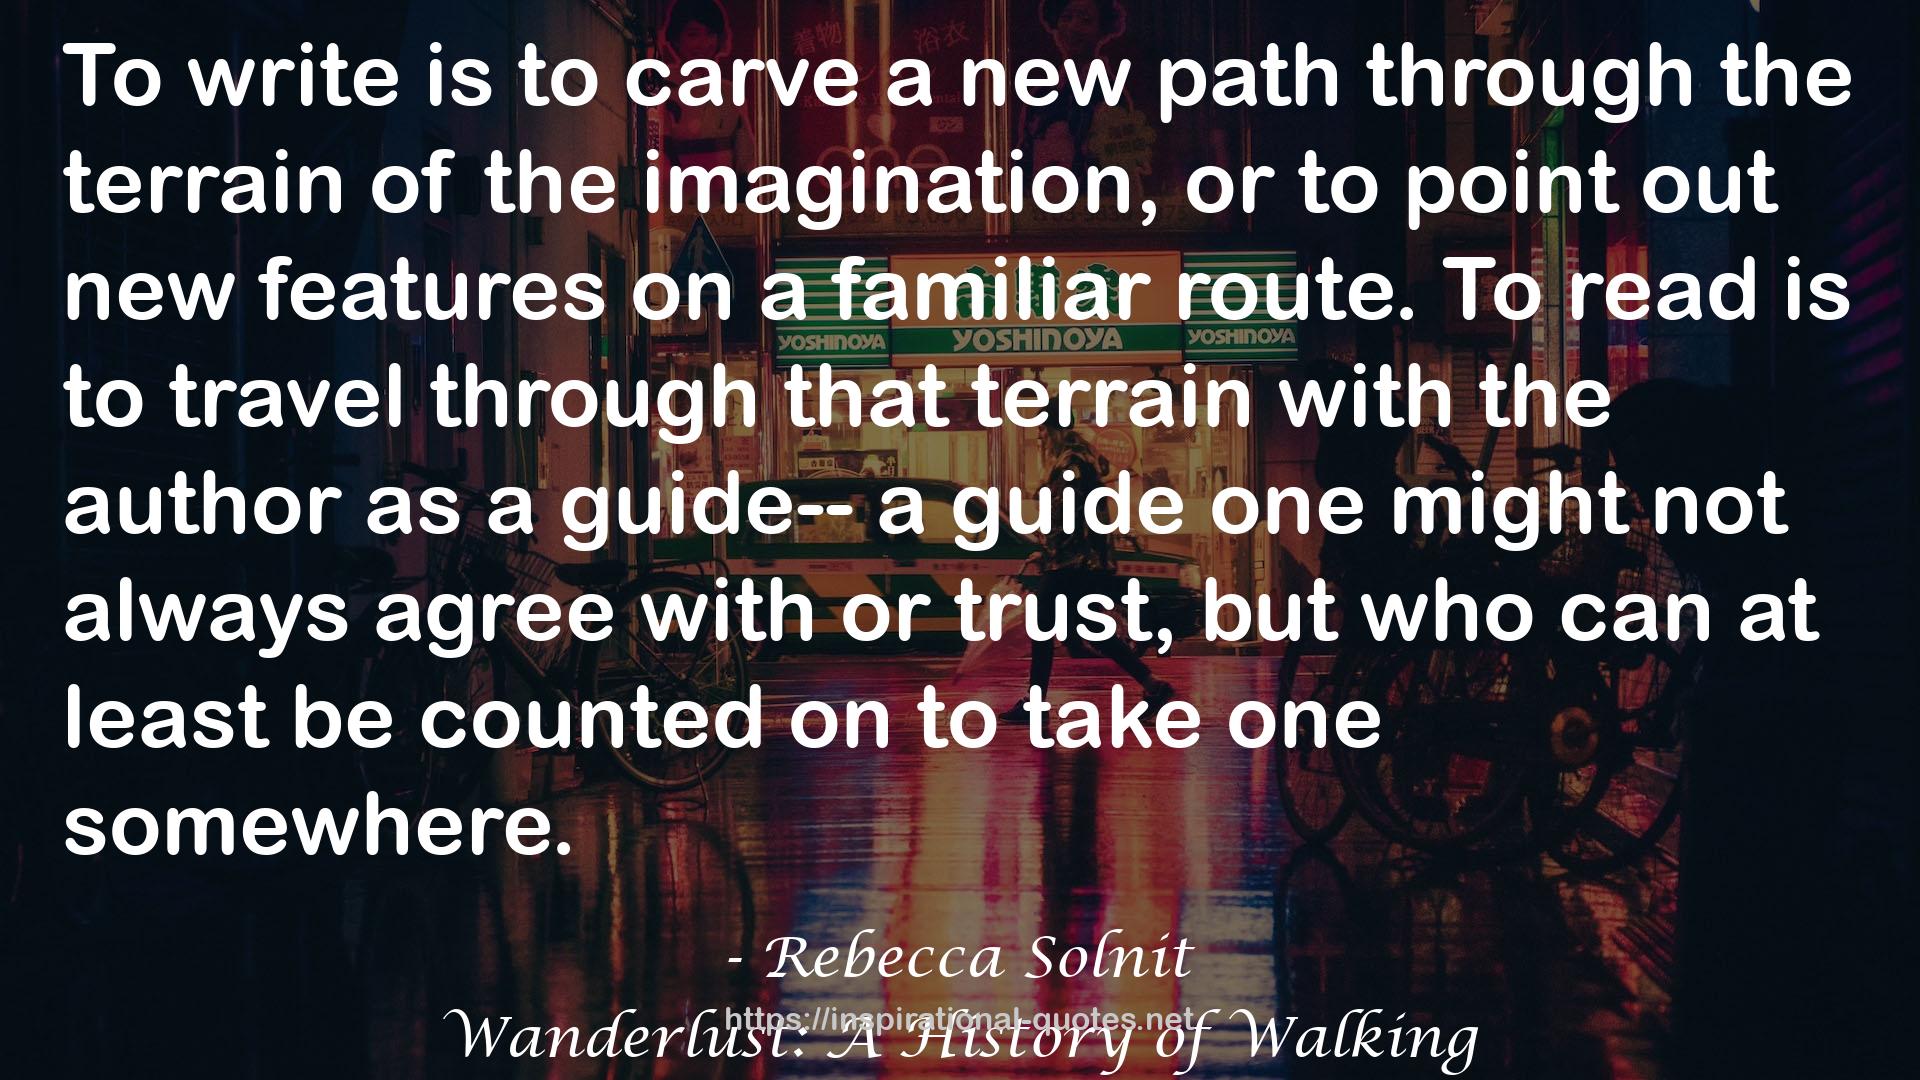 Wanderlust: A History of Walking QUOTES